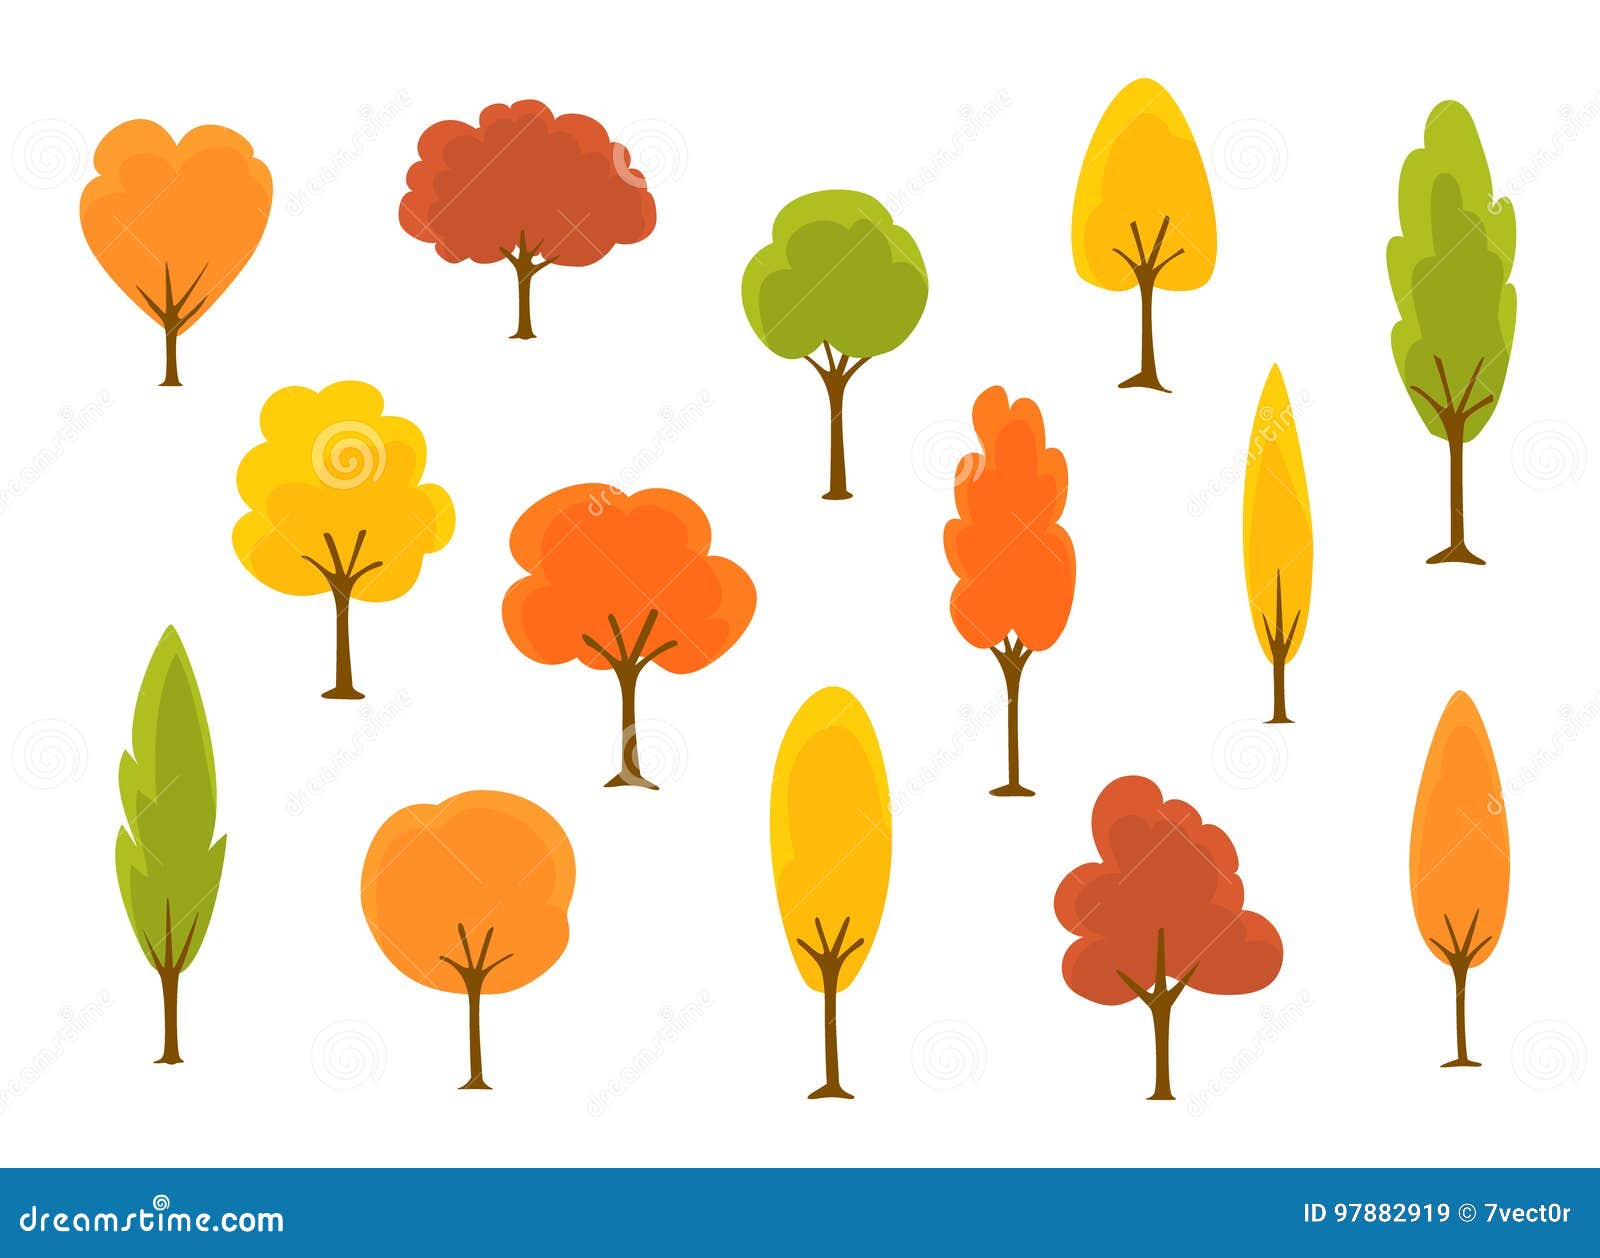 Fall Tree Clipart Images